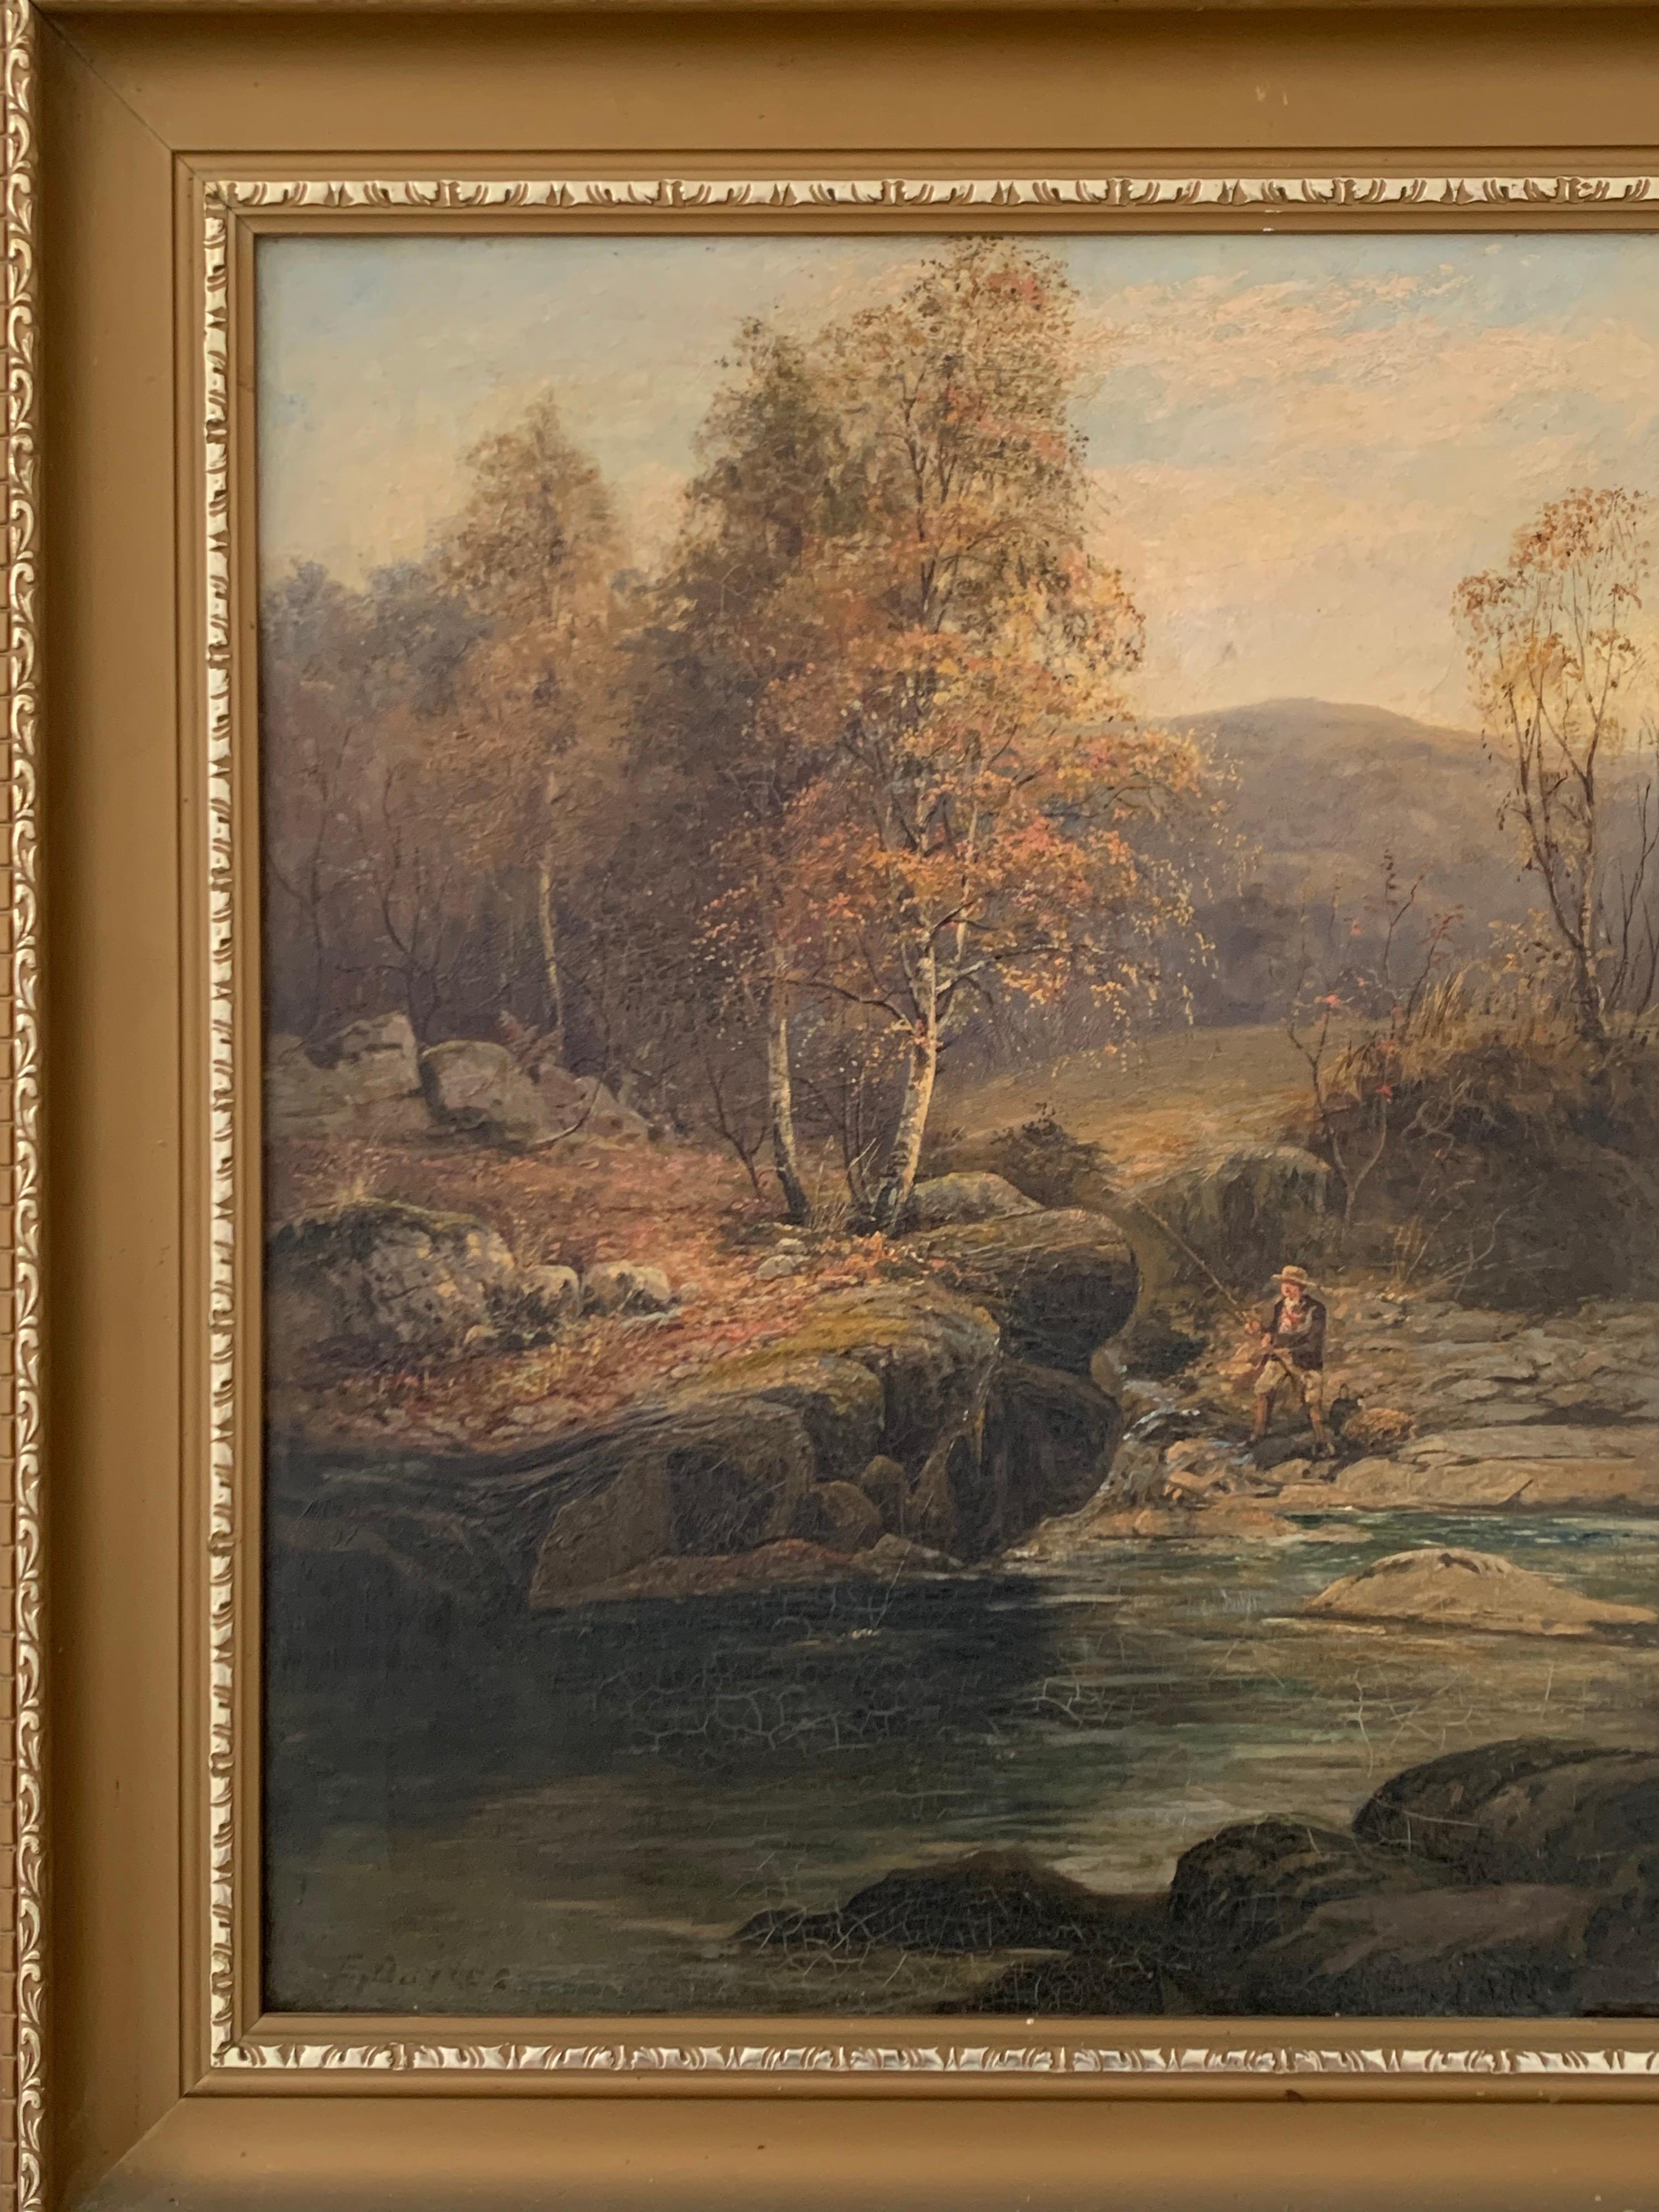 FINE VICTORIAN SIGNED OIL PAINTING - ANGLER IN AUTUMNAL RIVER LANDSCAPE - Victorian Painting by E. Davies